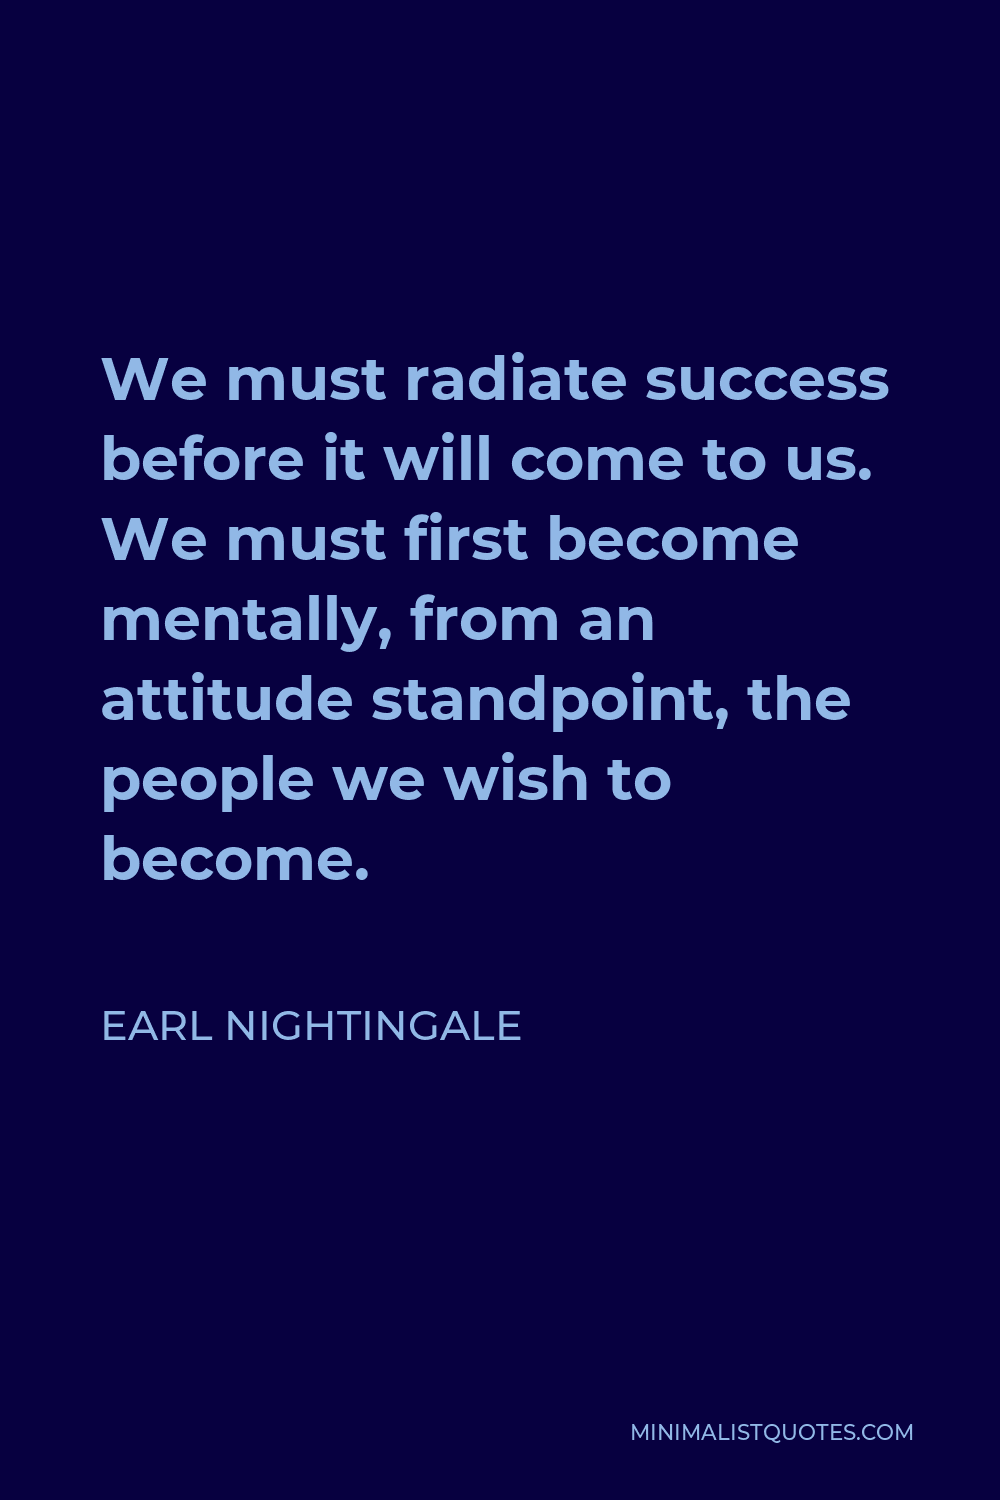 Earl Nightingale Quote - We must radiate success before it will come to us. We must first become mentally, from an attitude standpoint, the people we wish to become.